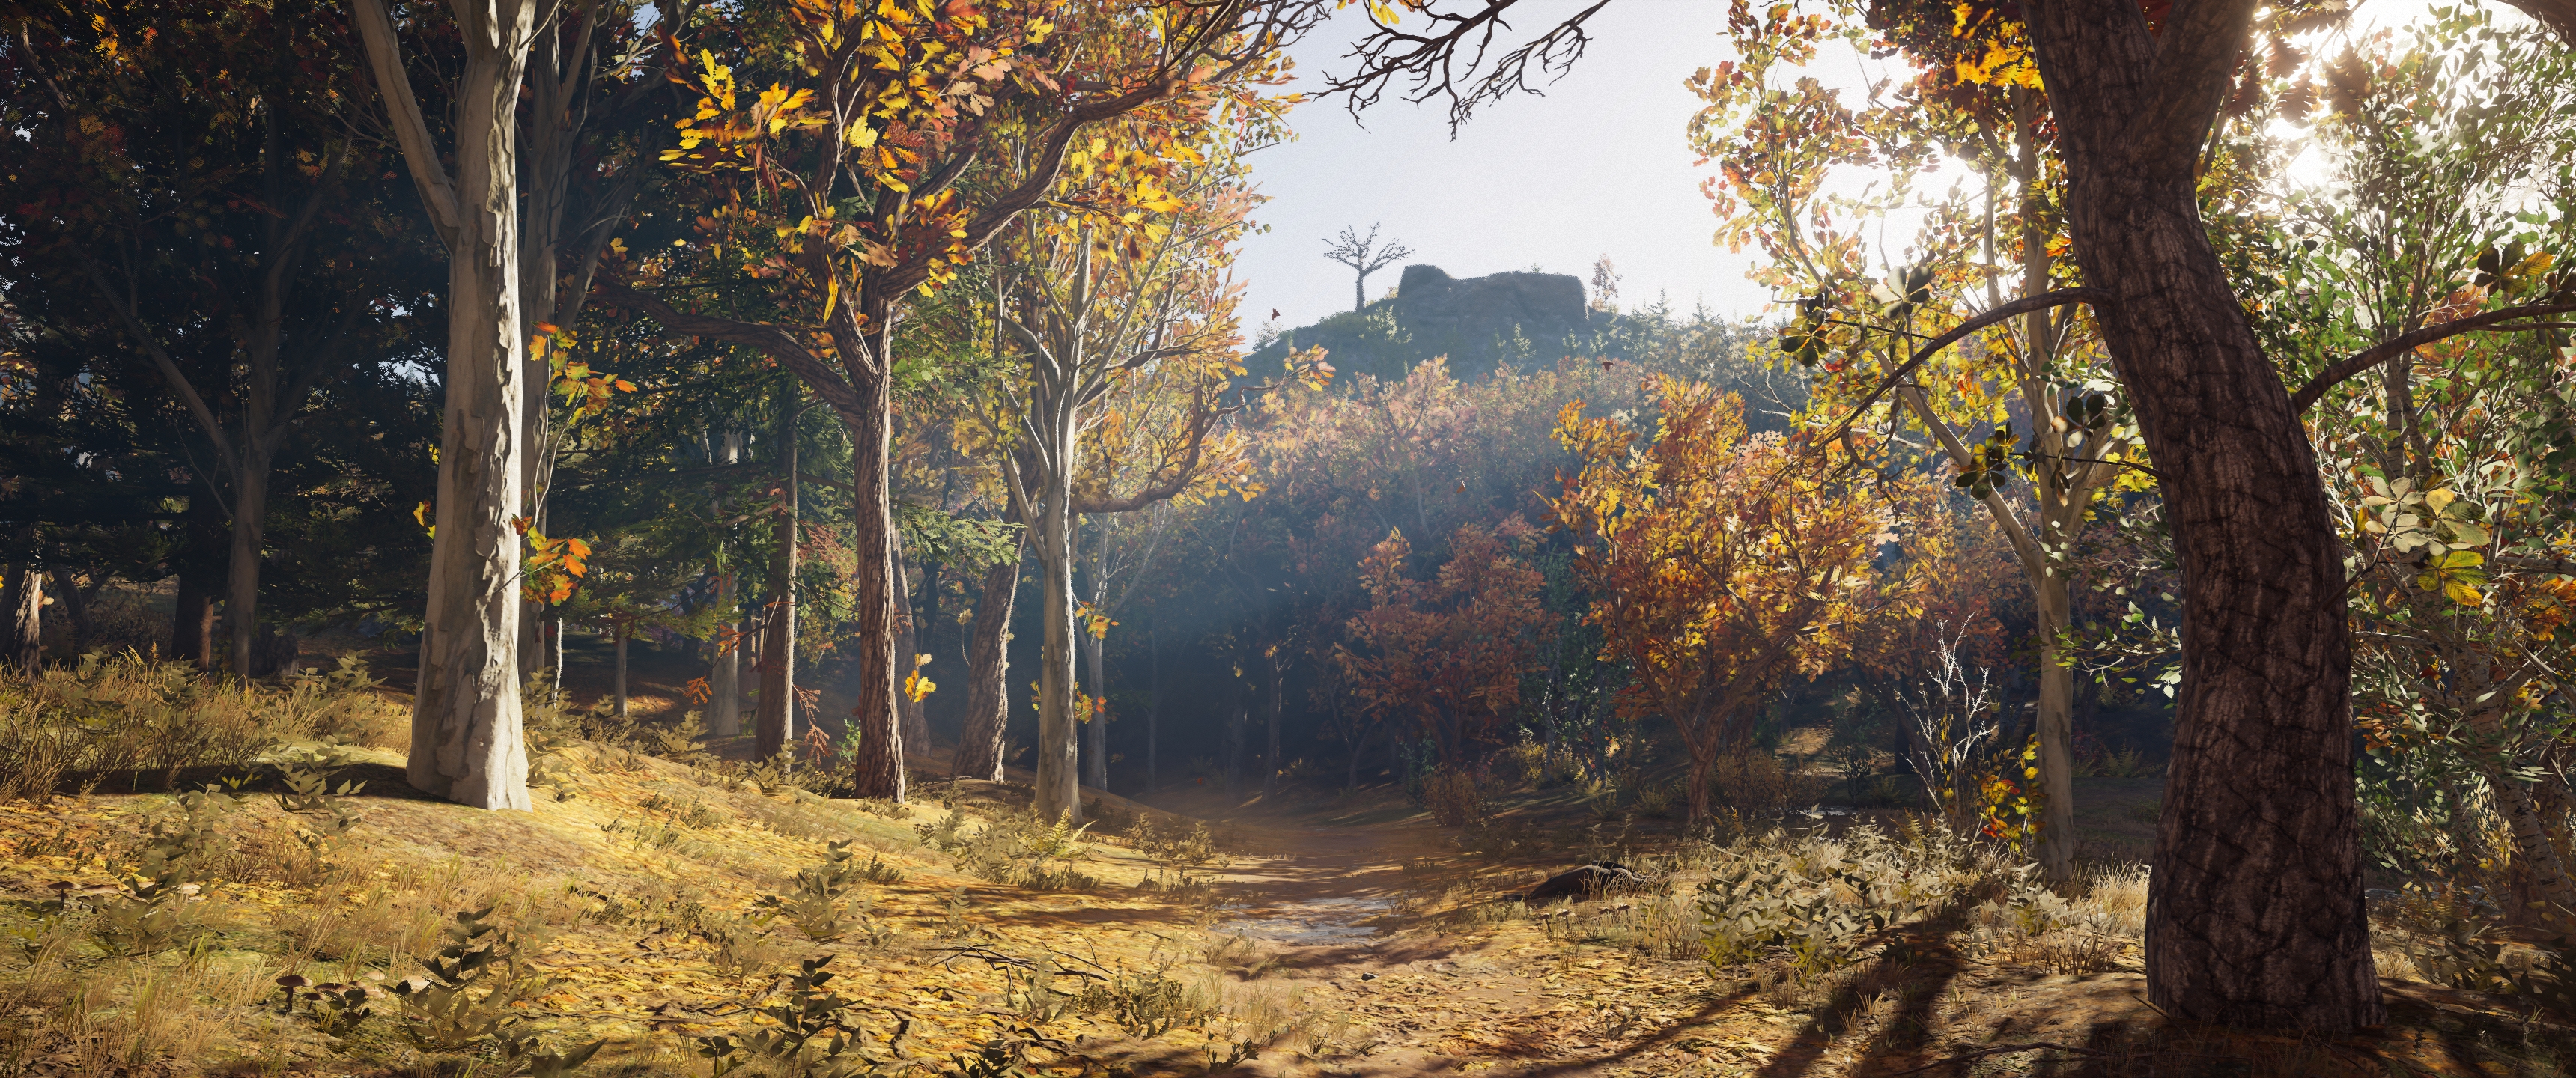 General 3440x1440 video games Kassandra Assassins Creed: Odyssey Assassin's Creed Ubisoft video game art screen shot trees nature leaves ground sunlight CGI forest